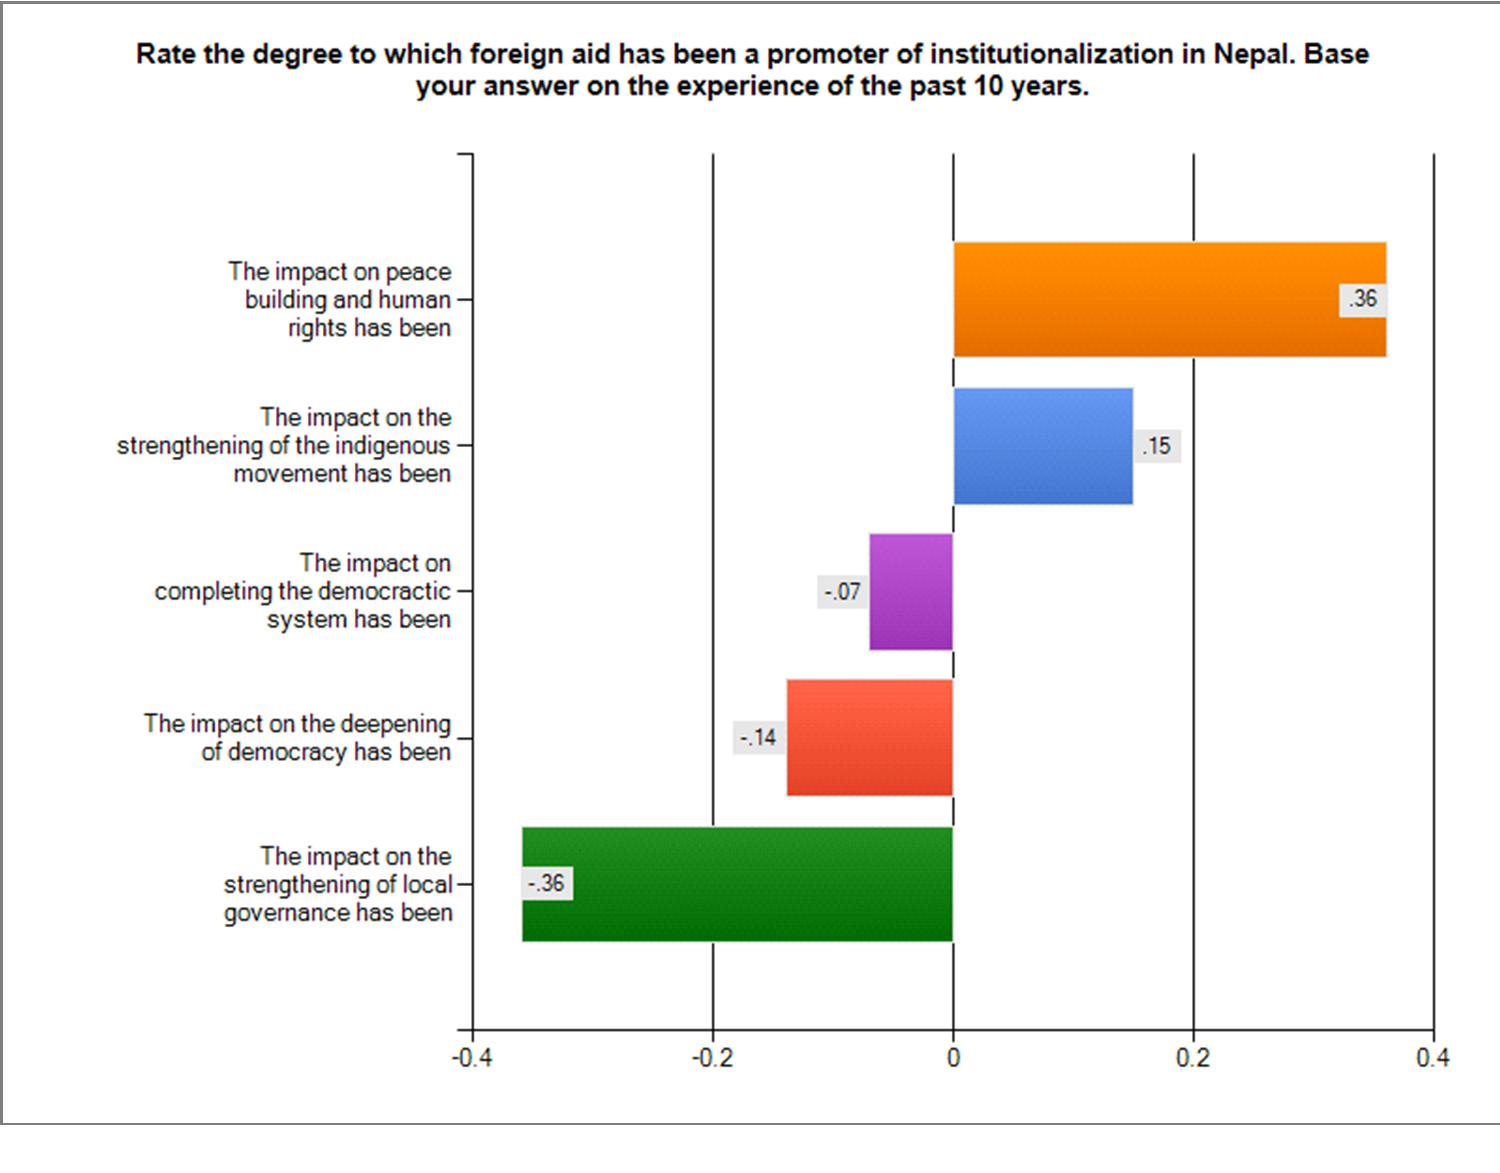 Figure 4: Aid as a promoter of institutionalization, the view of researchers and journalists.